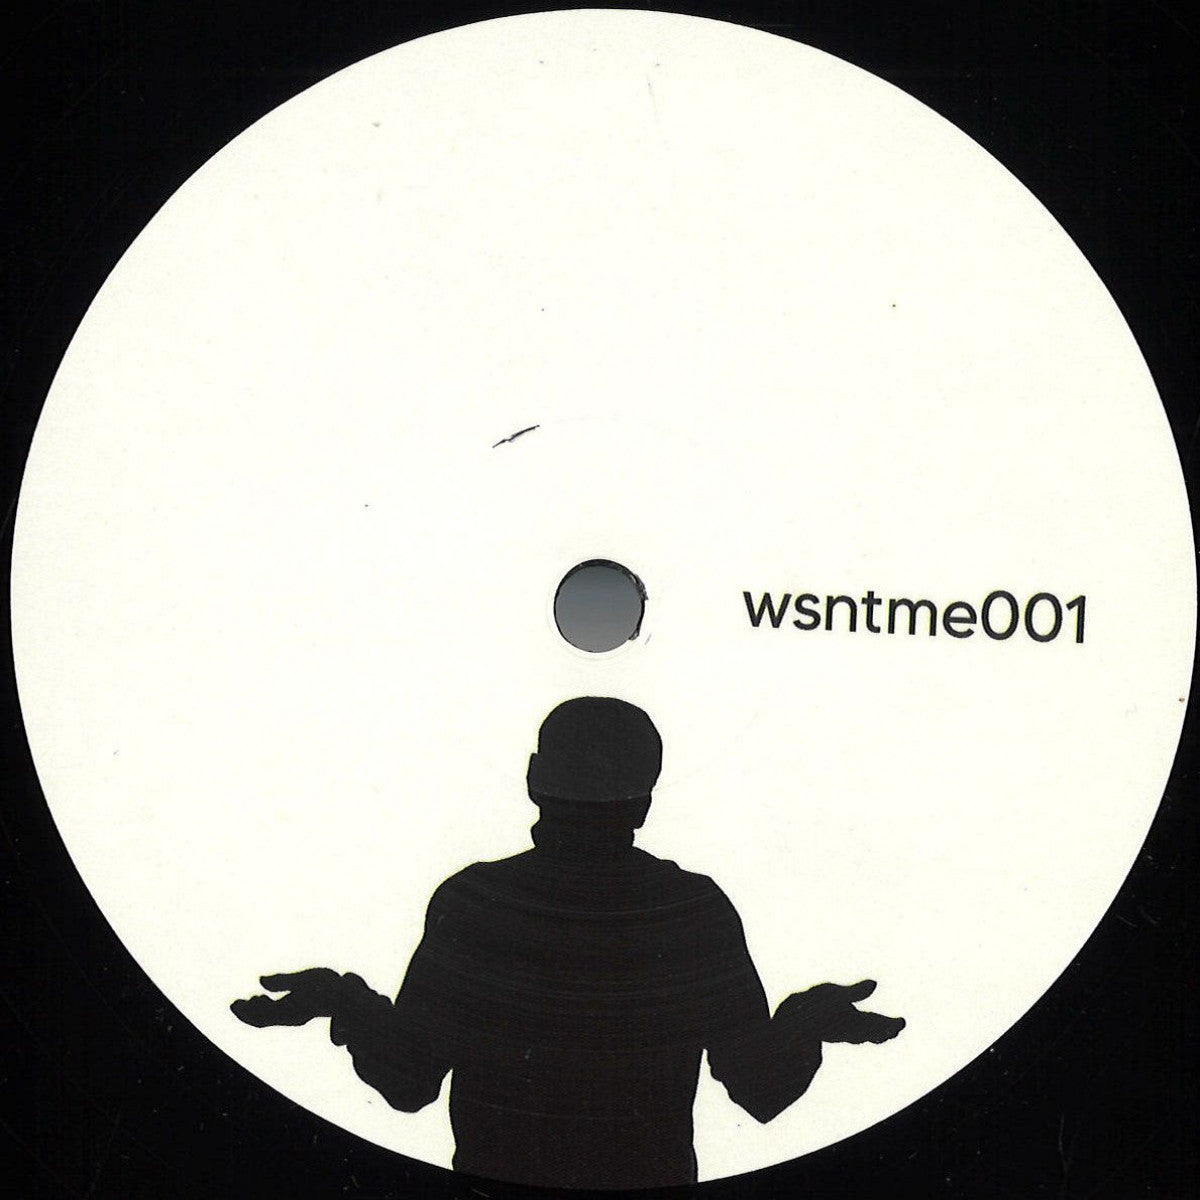 WSNTME001